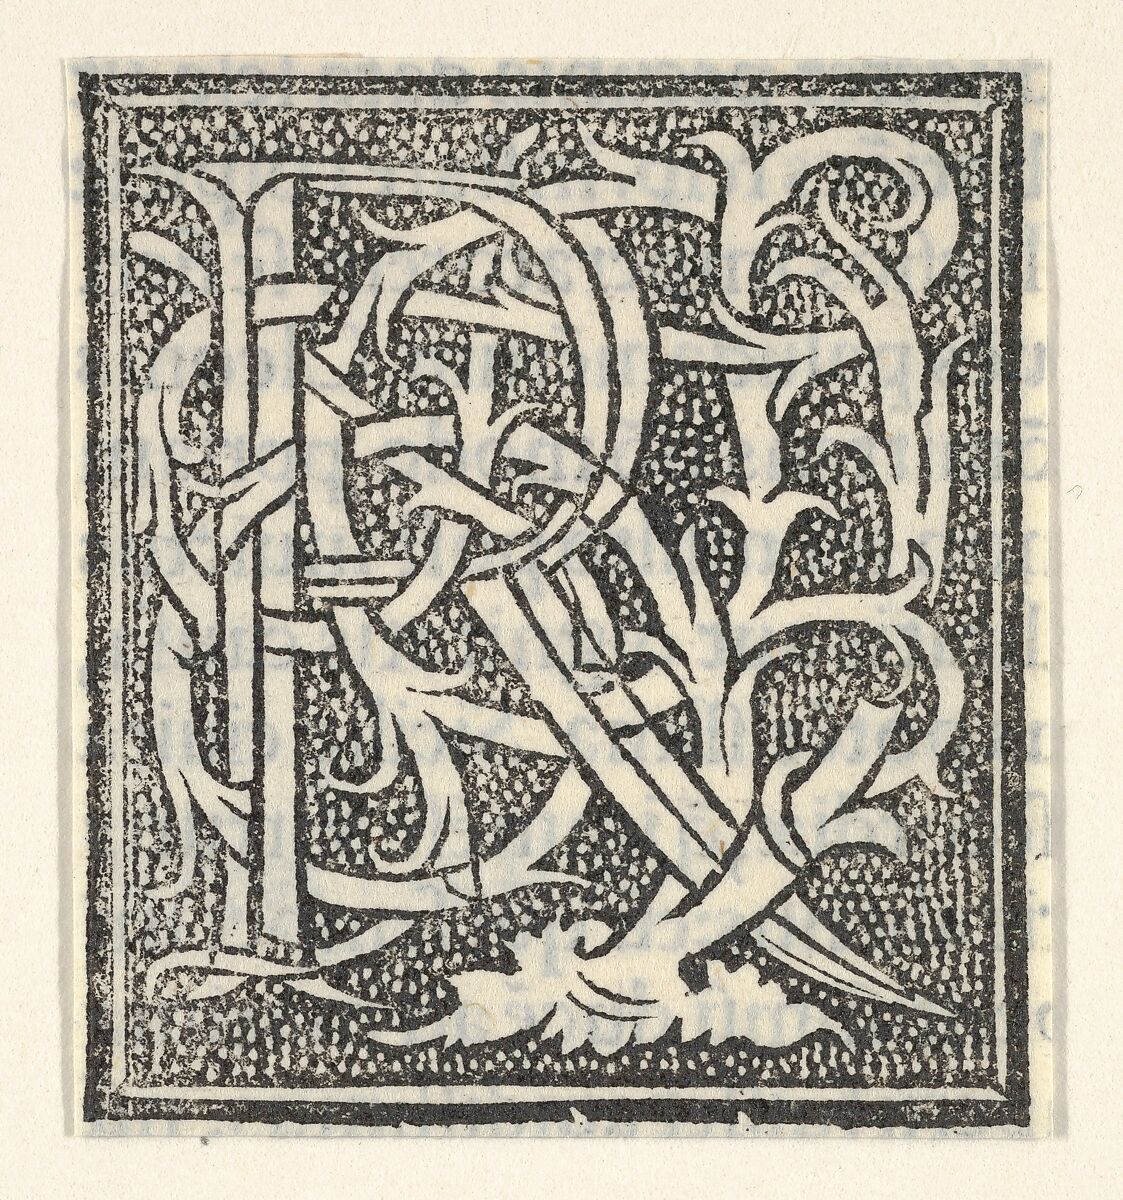 Initial letter R on patterned background, Anonymous, Italian, 16th century, Woodcut, criblé ground 